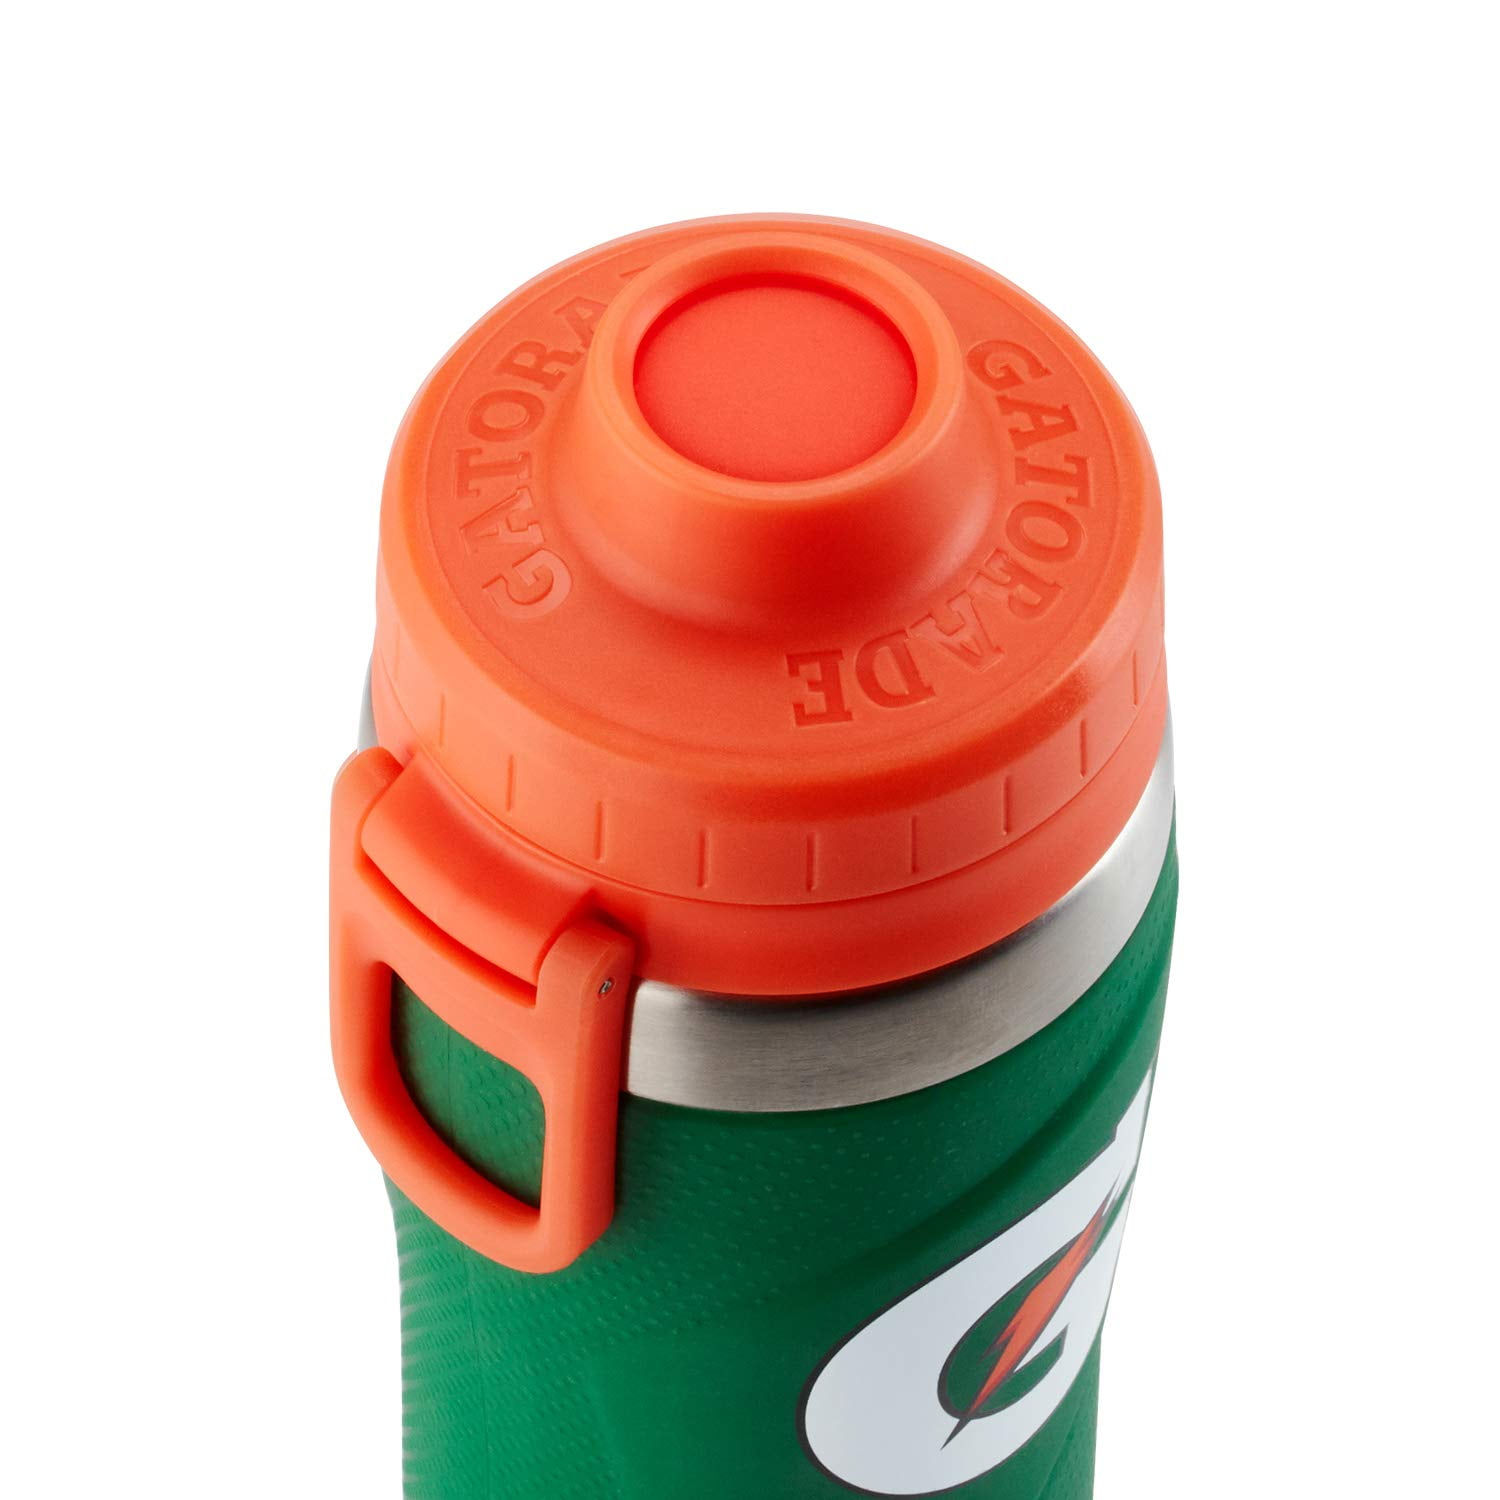 Gatorade 26 oz. Stainless Steel Insulated Sports Bottle-White - Temple's  Sporting Goods